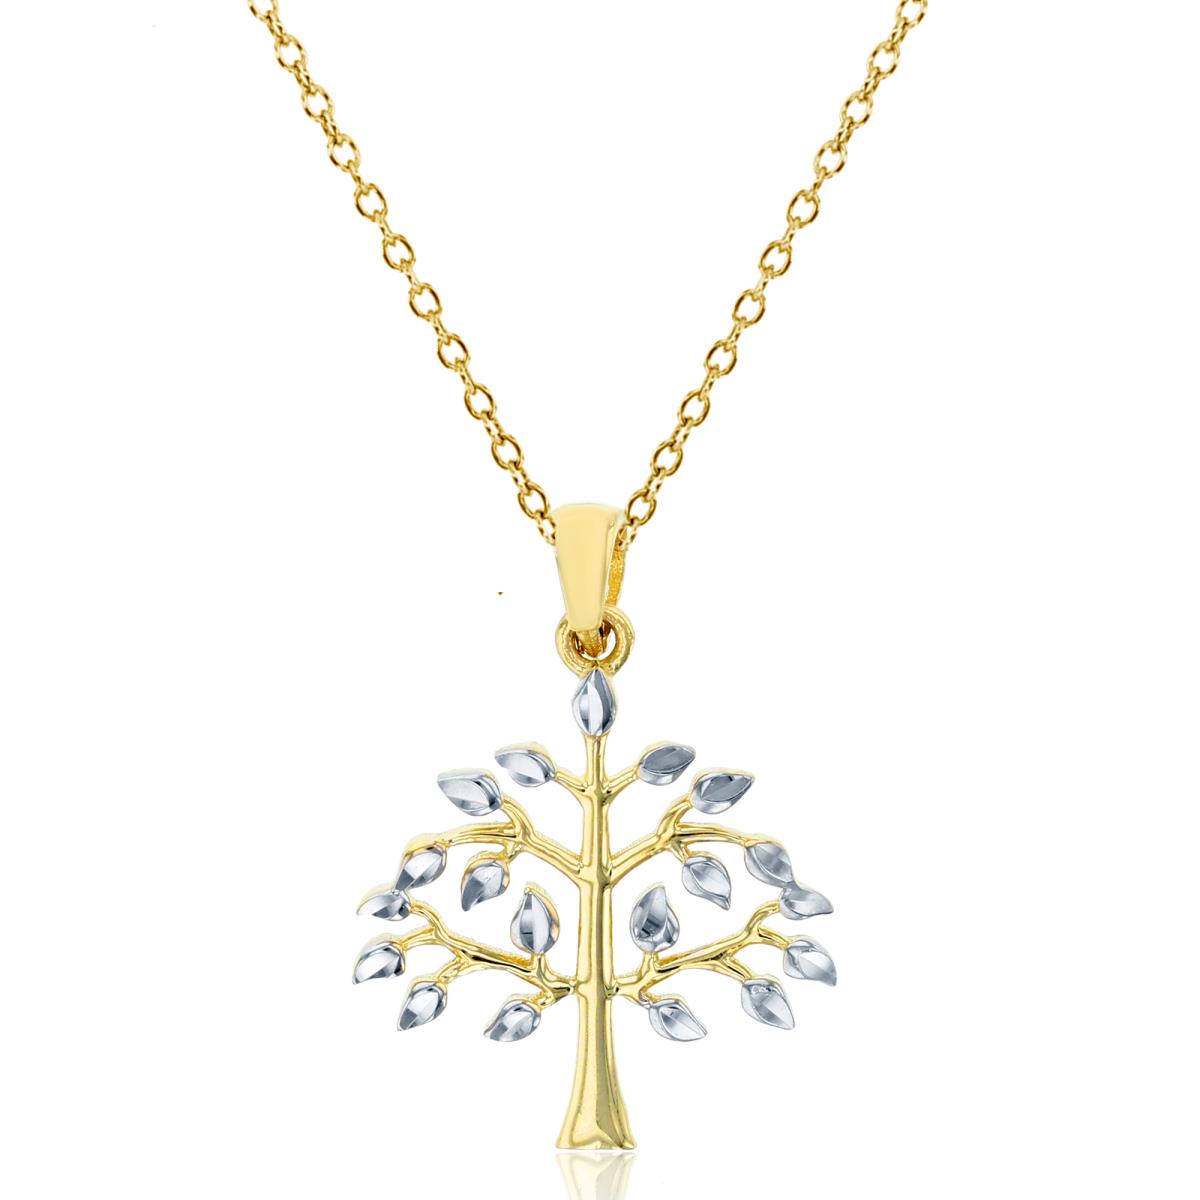 10K Two-Tone Gold Polished Tree Of Life 18" Necklace